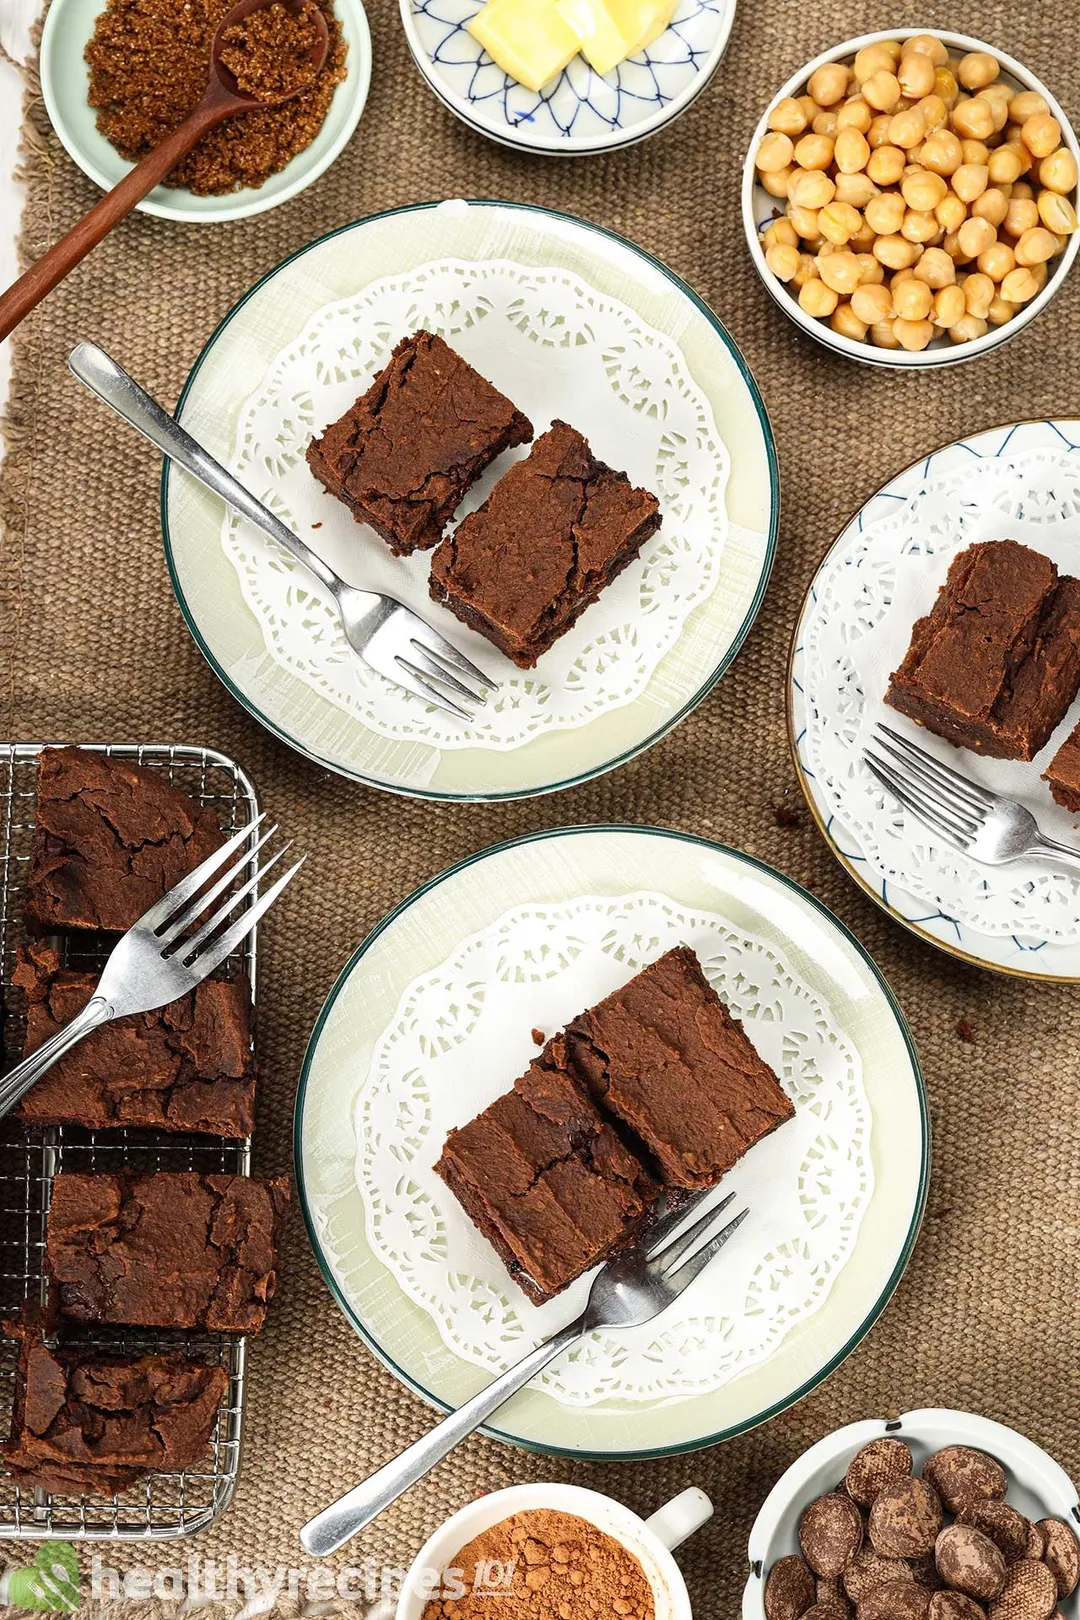 Plates of chickpea brownies with forks on the side laid near a small disk of chickpea, cocoa powder, chocolate chips, and butter cubes.